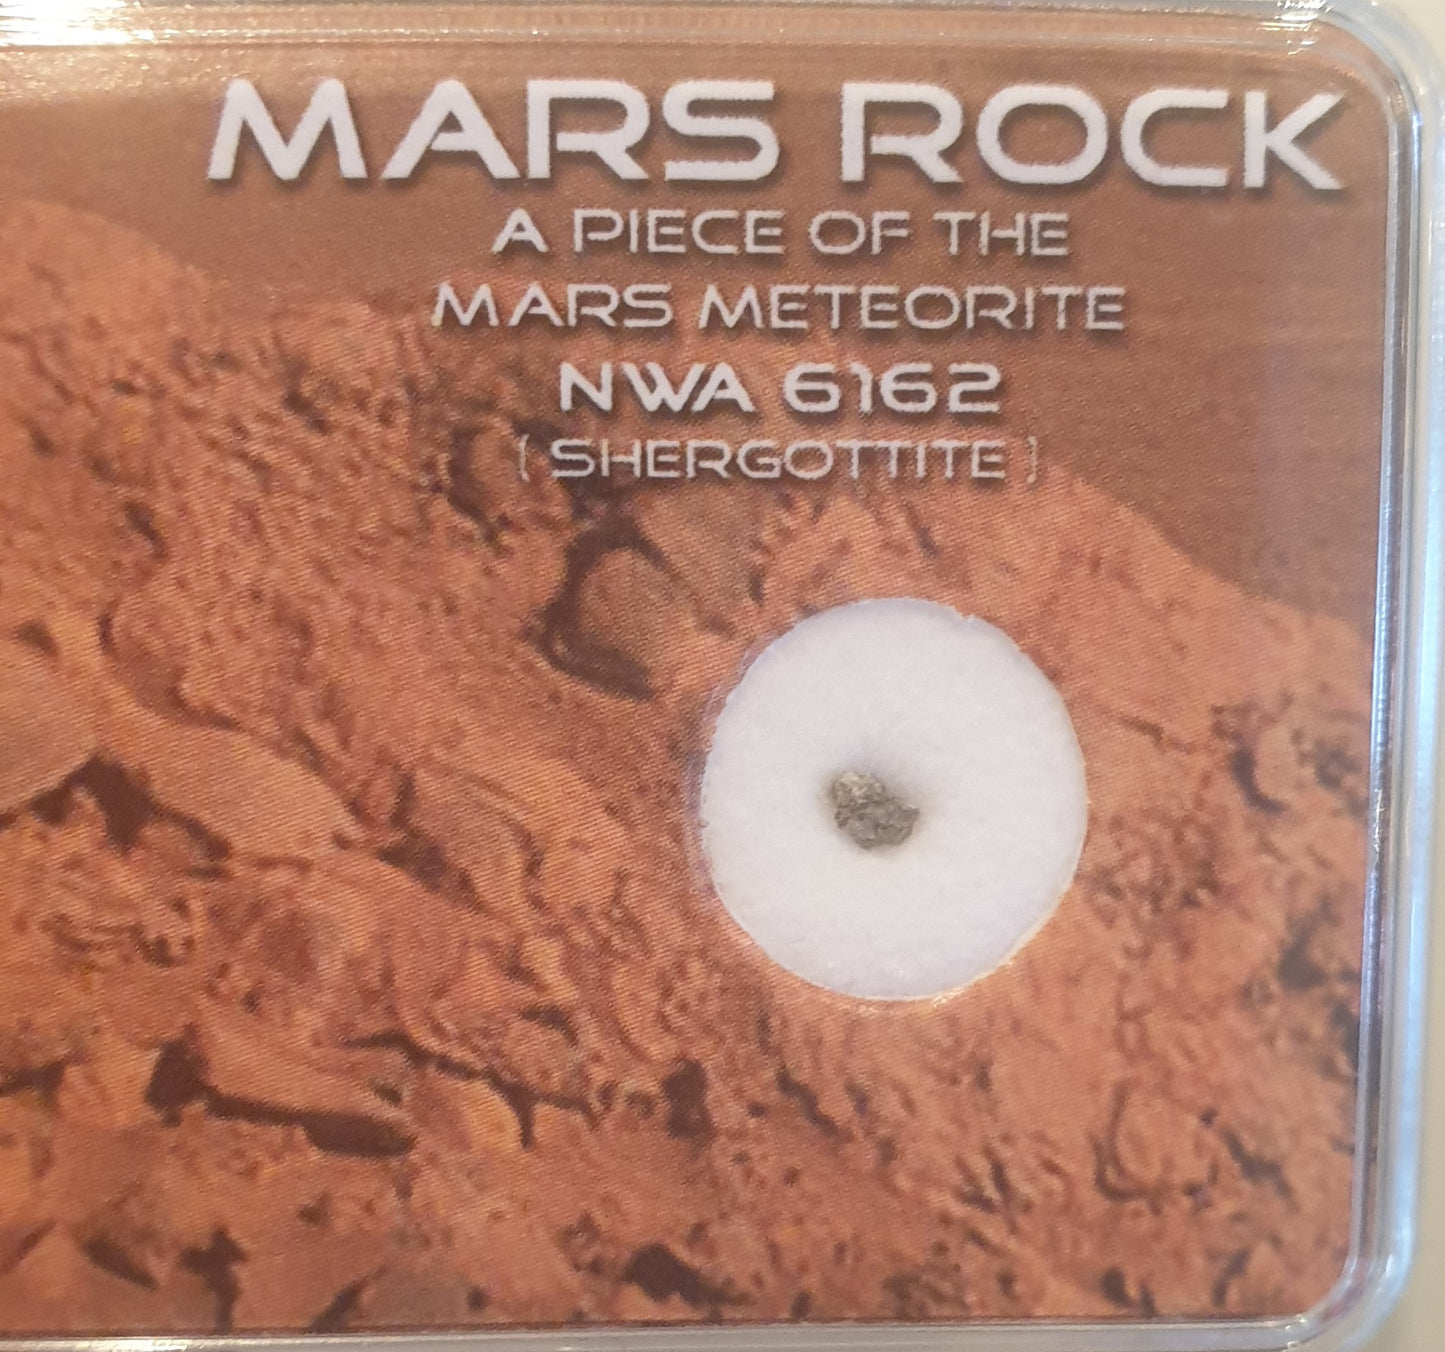 6-8 year-old book PLUS authentic 9mg Meteorite from Mars